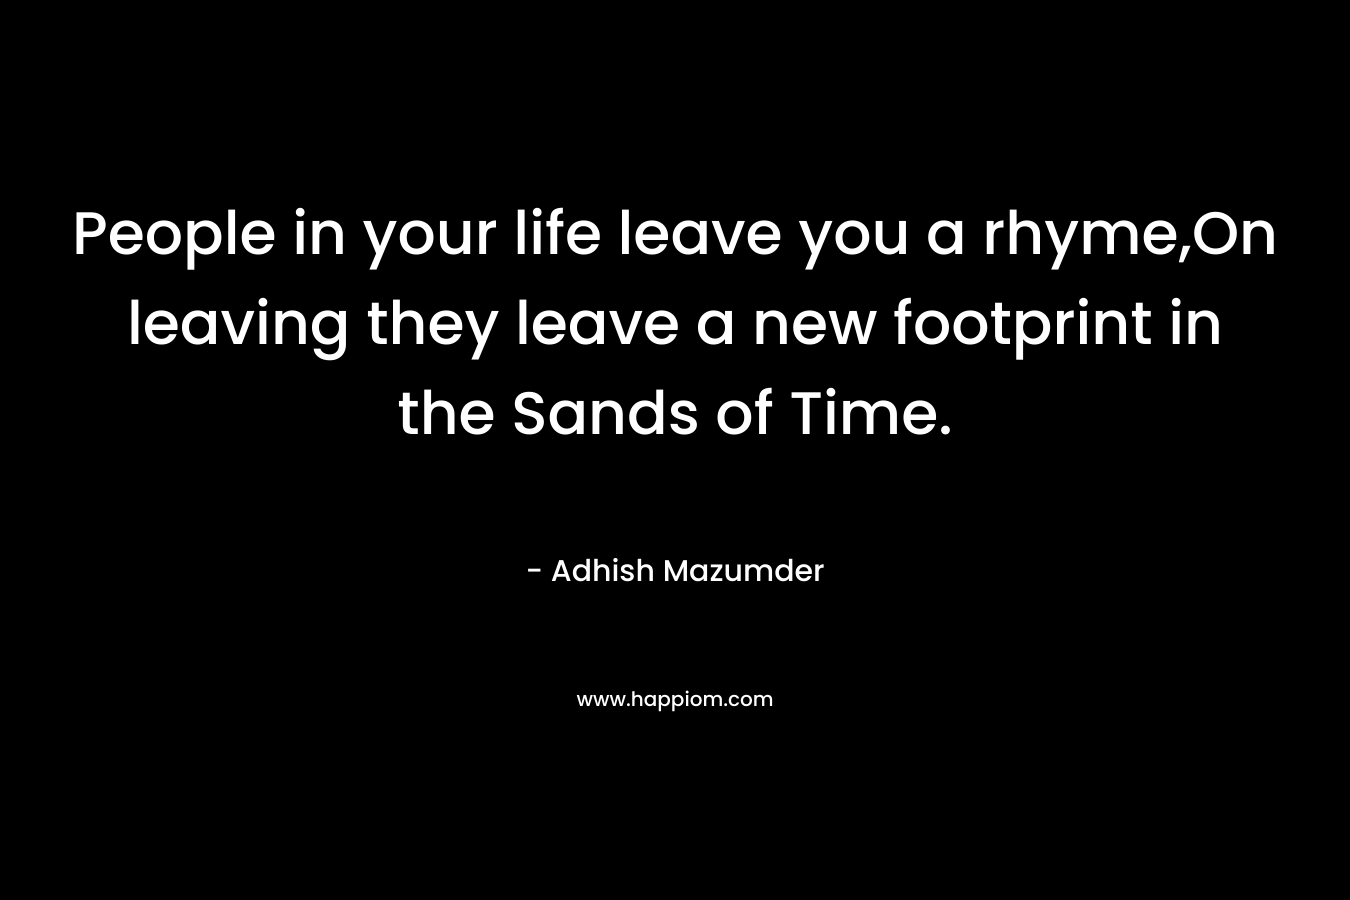 People in your life leave you a rhyme,On leaving they leave a new footprint in the Sands of Time. – Adhish Mazumder